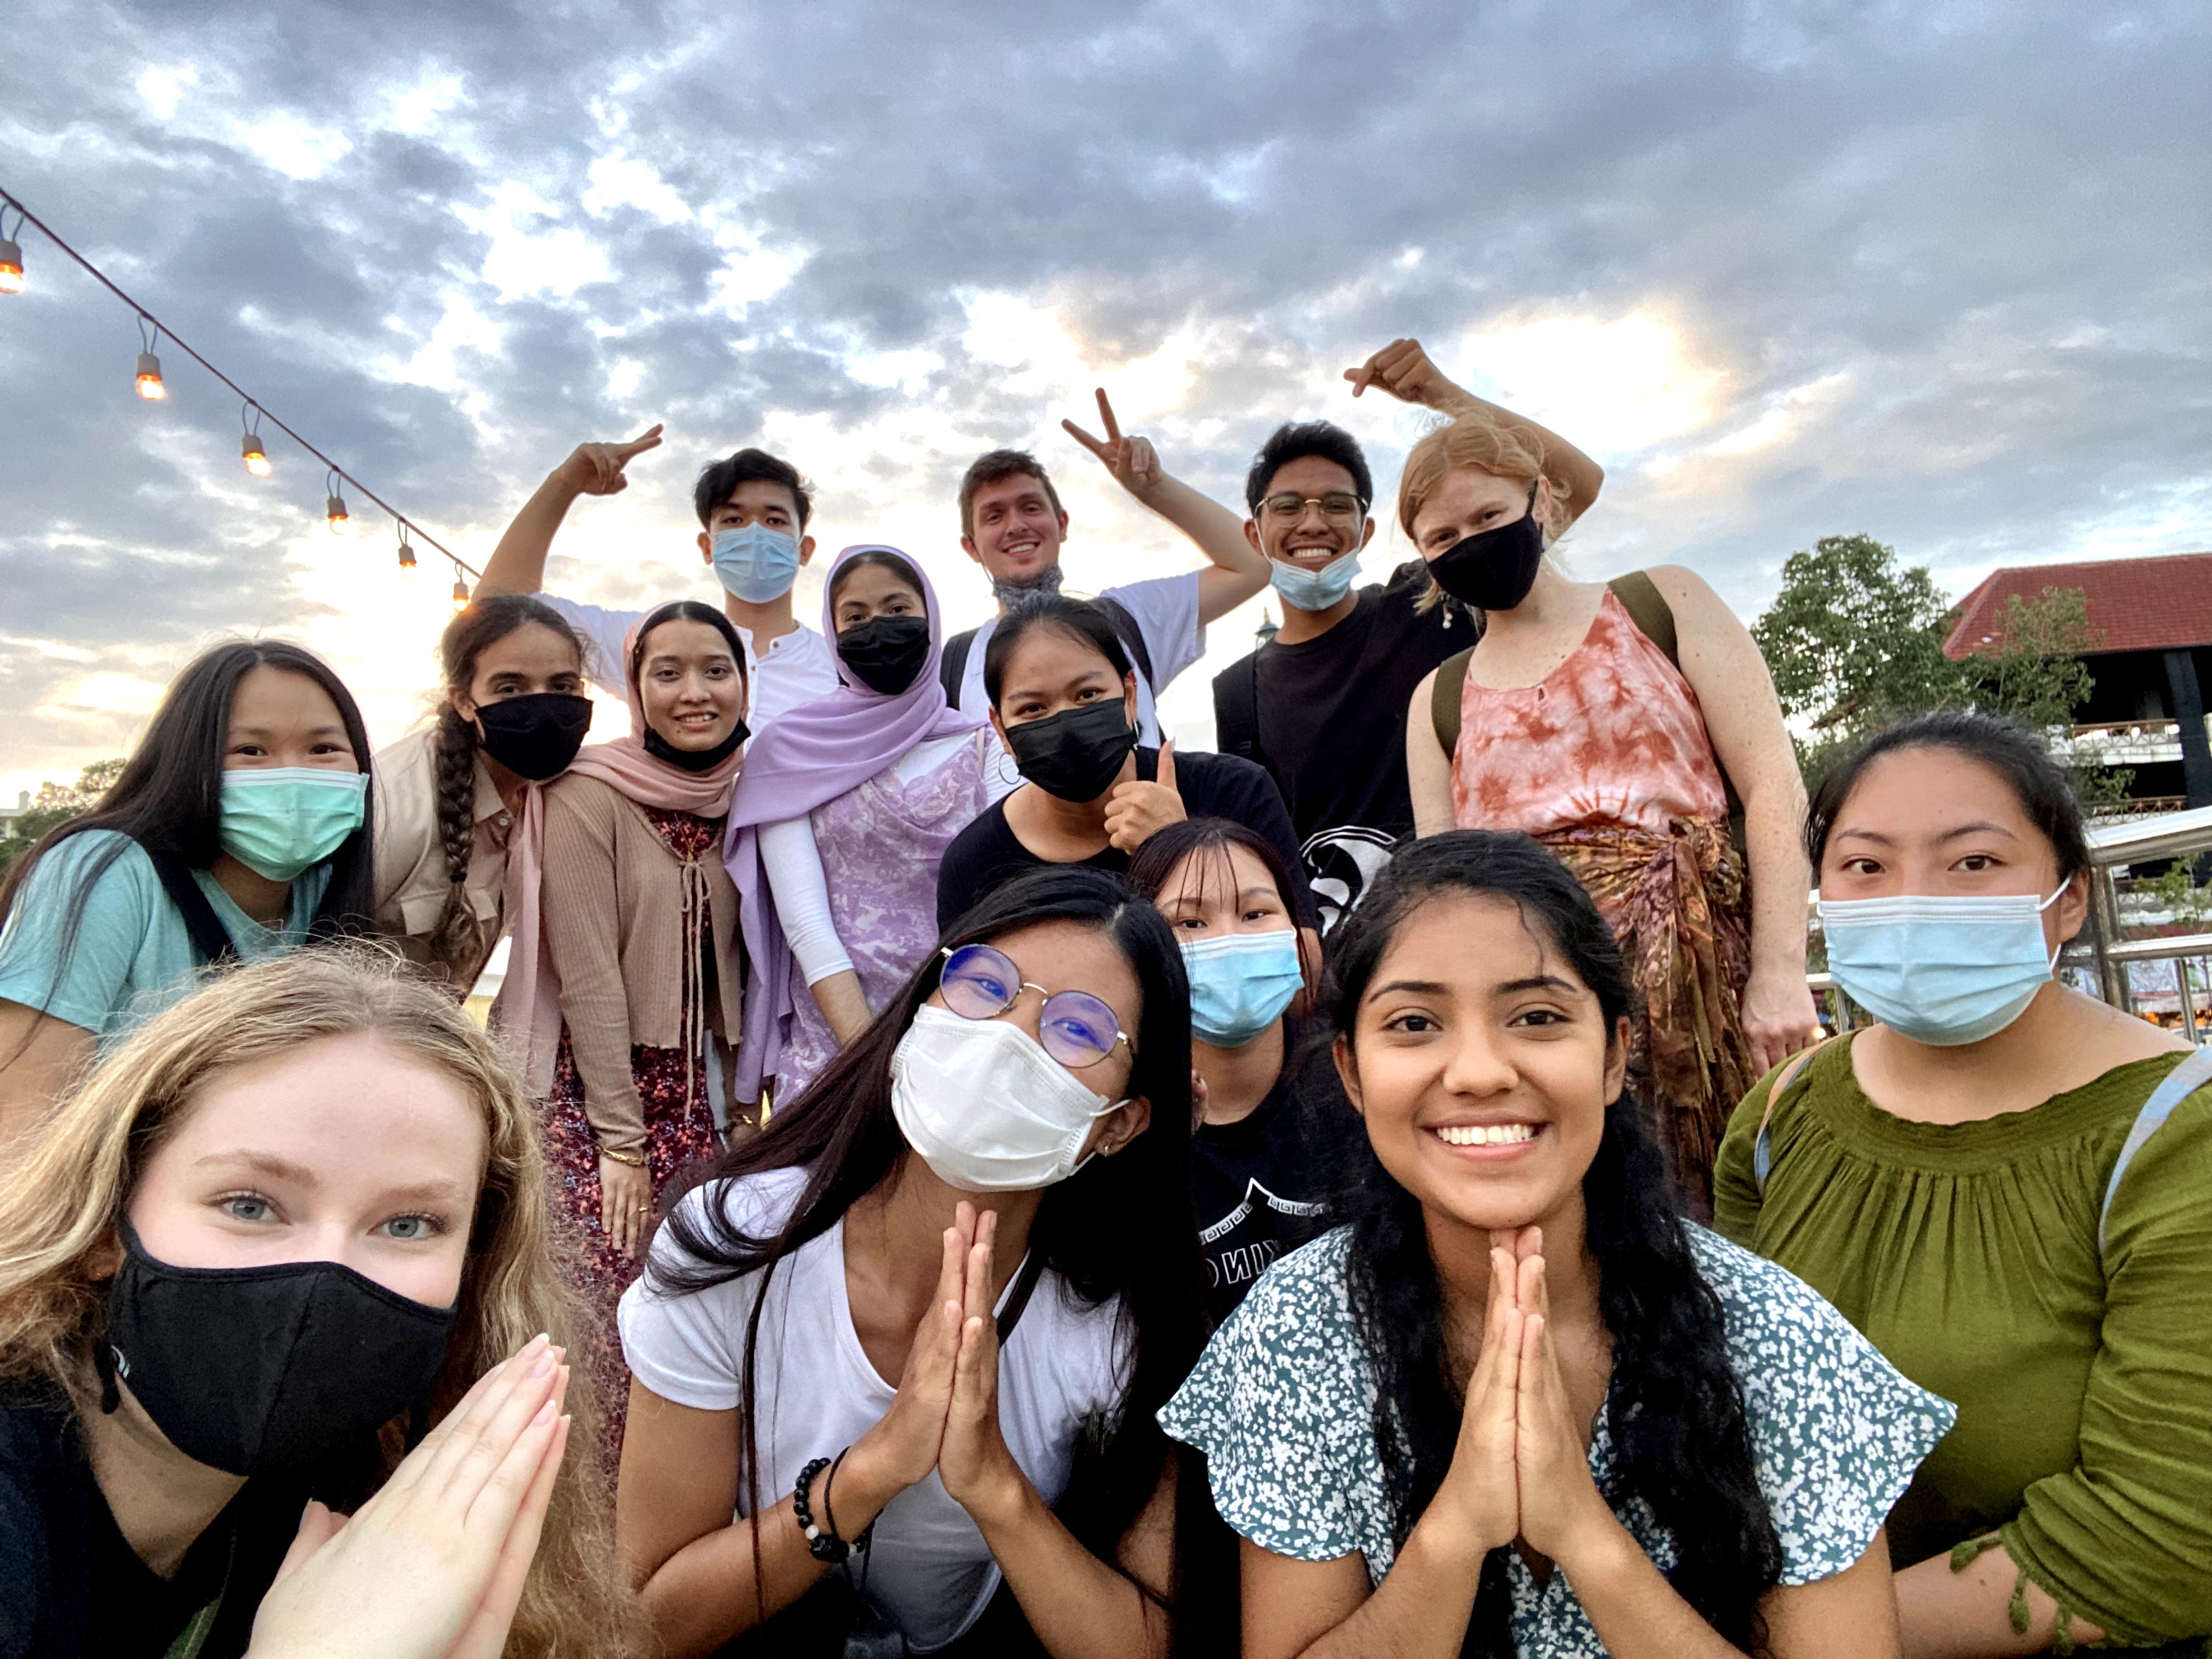 14 study abroad students pose together in Thailand